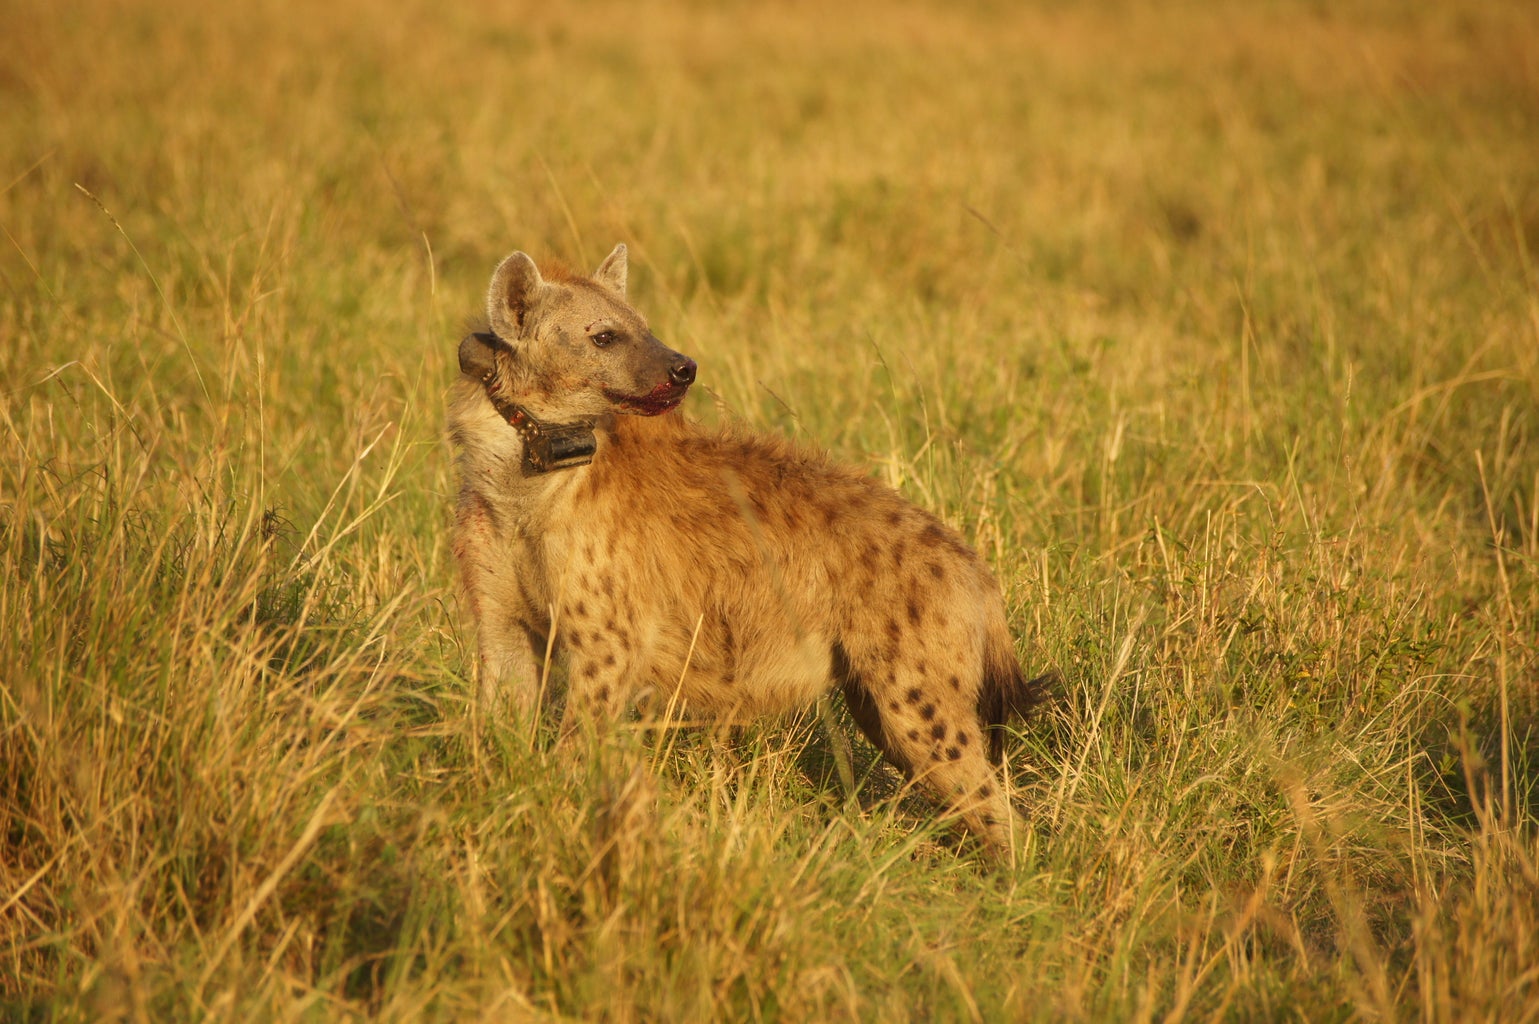 A spotted hyena wearing a tracking collar.